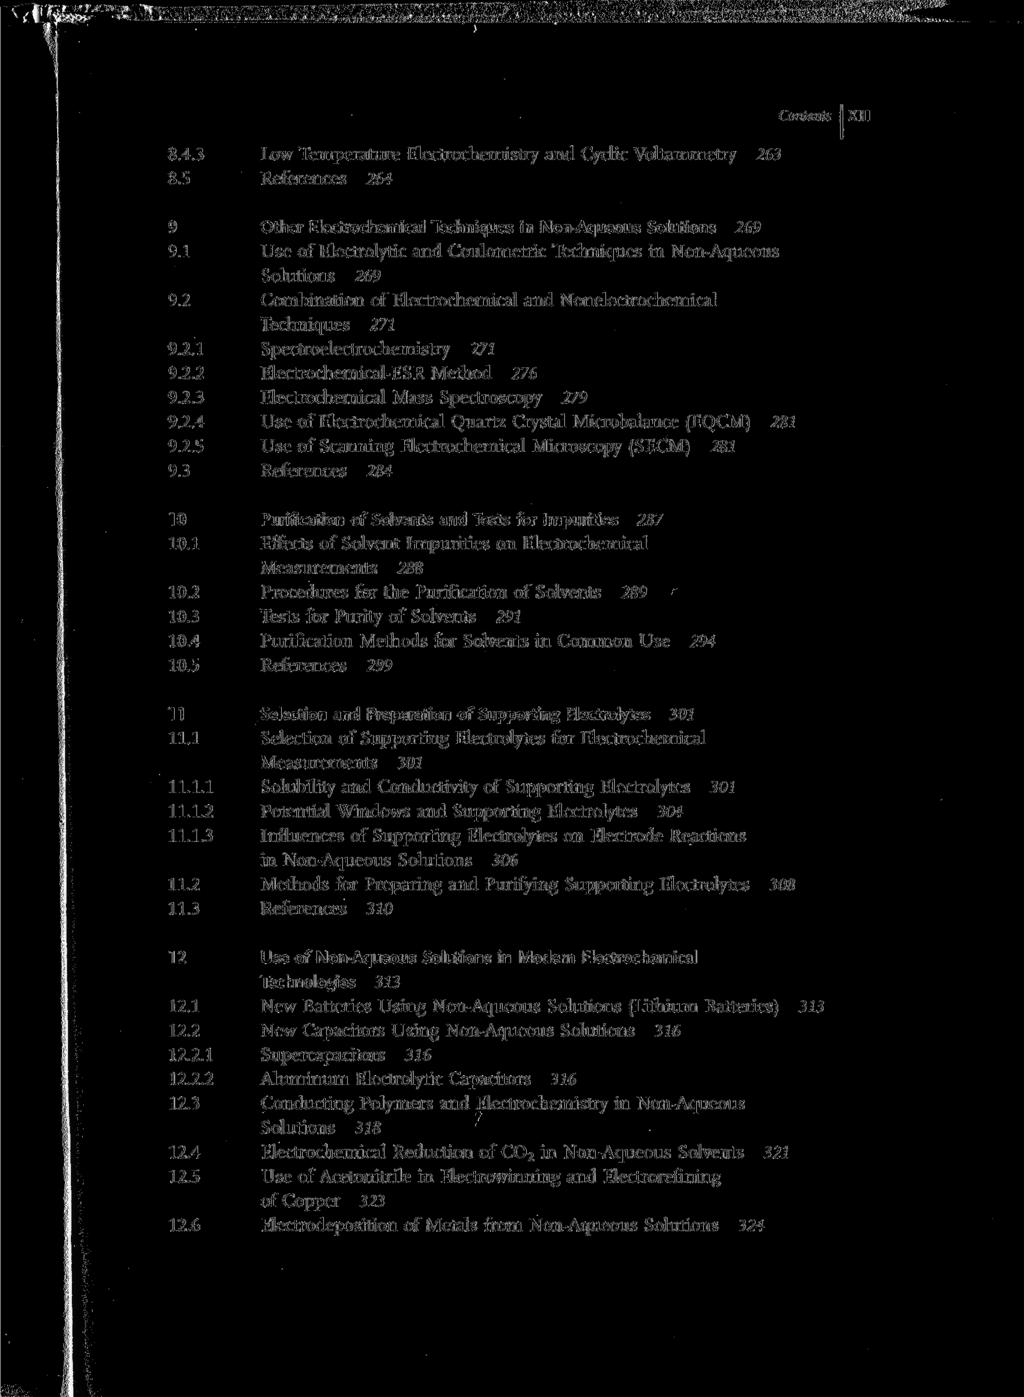 Contents XIII 8.4.3 Low Temperature Electrochemistry and Cyclic Voltammetry 263 8.5 References 264 9 Other Electrochemical Techniques in Non-Aqueous Solutions 269 9.